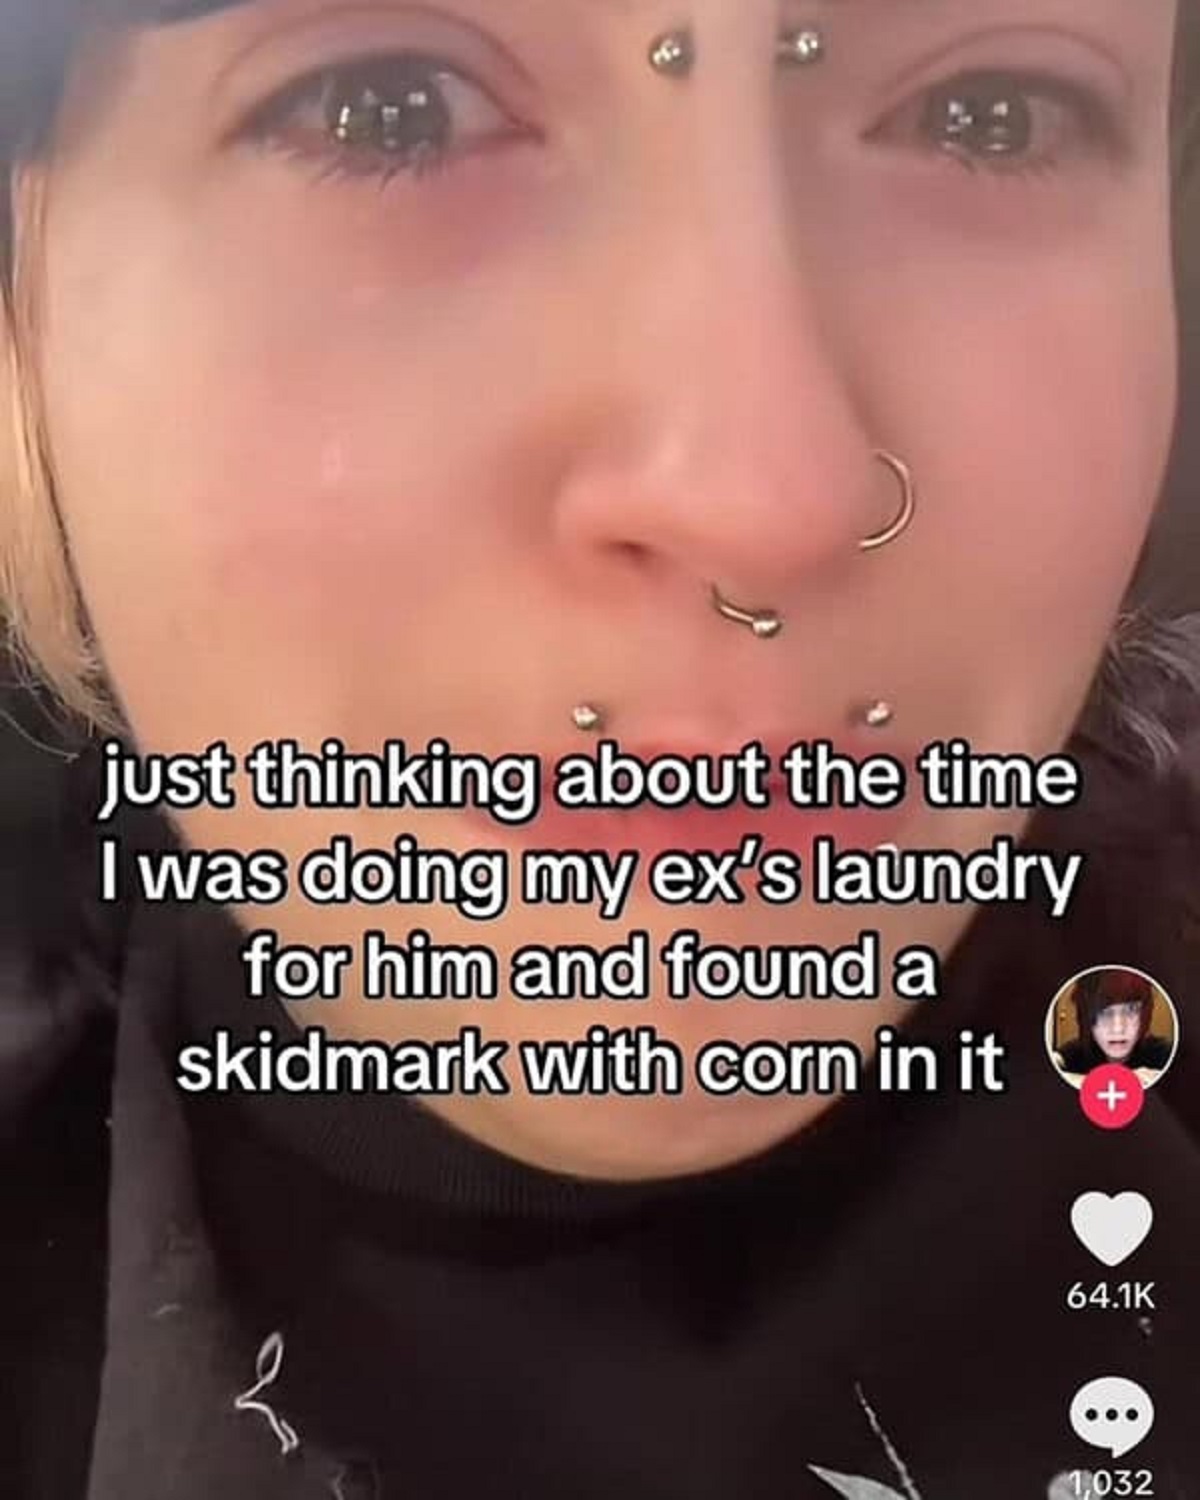 girl - just thinking about the time I was doing my ex's laundry for him and found a skidmark with corn in it 1,032